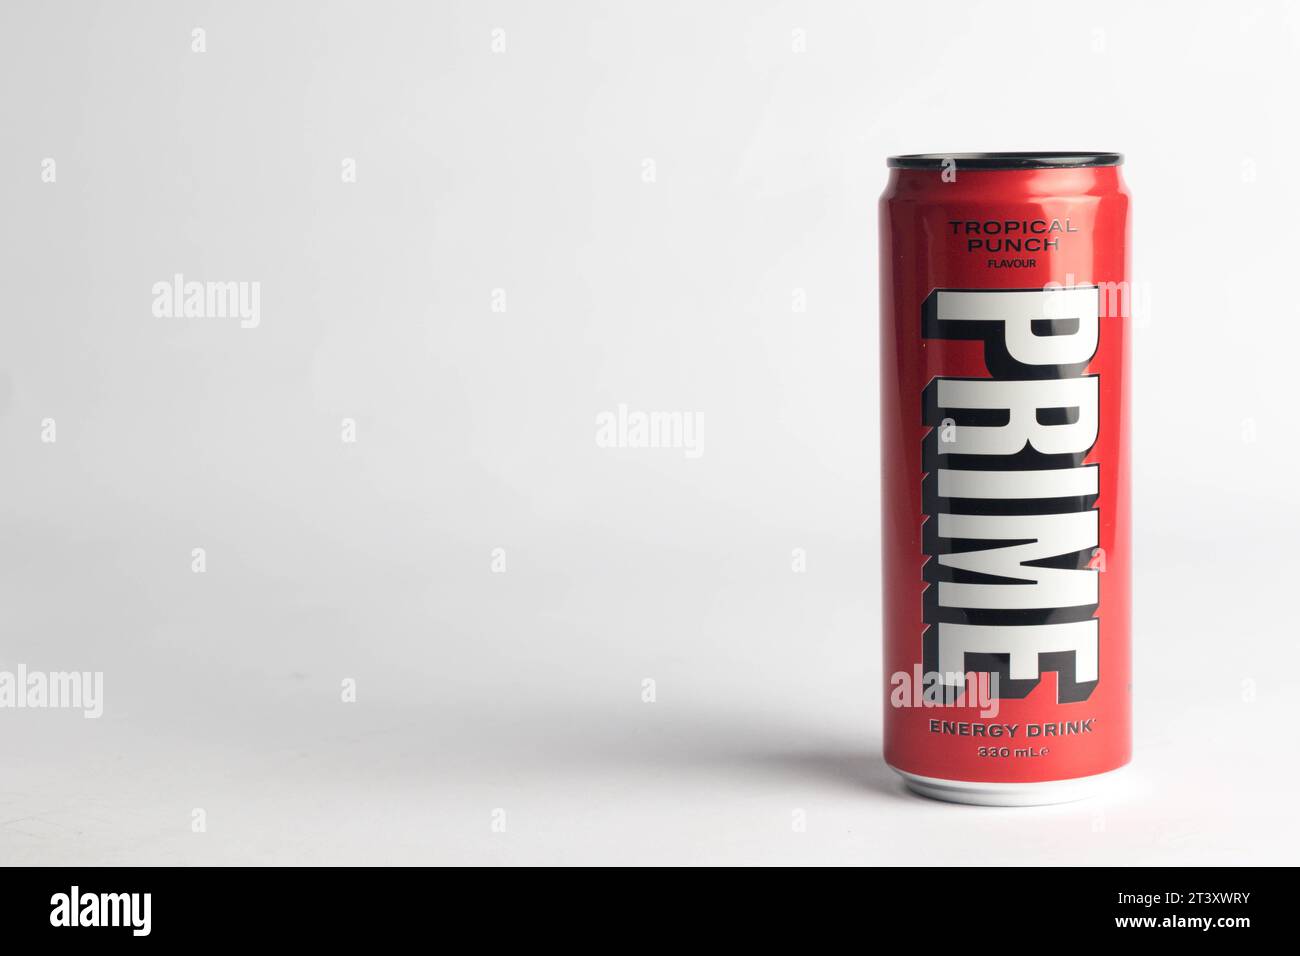 London, United Kingdom, 18th October 2023:- A Can of Tropical Punch Prime Energy drink, promoted by Youtubers Logan Paul and KSI Stock Photo